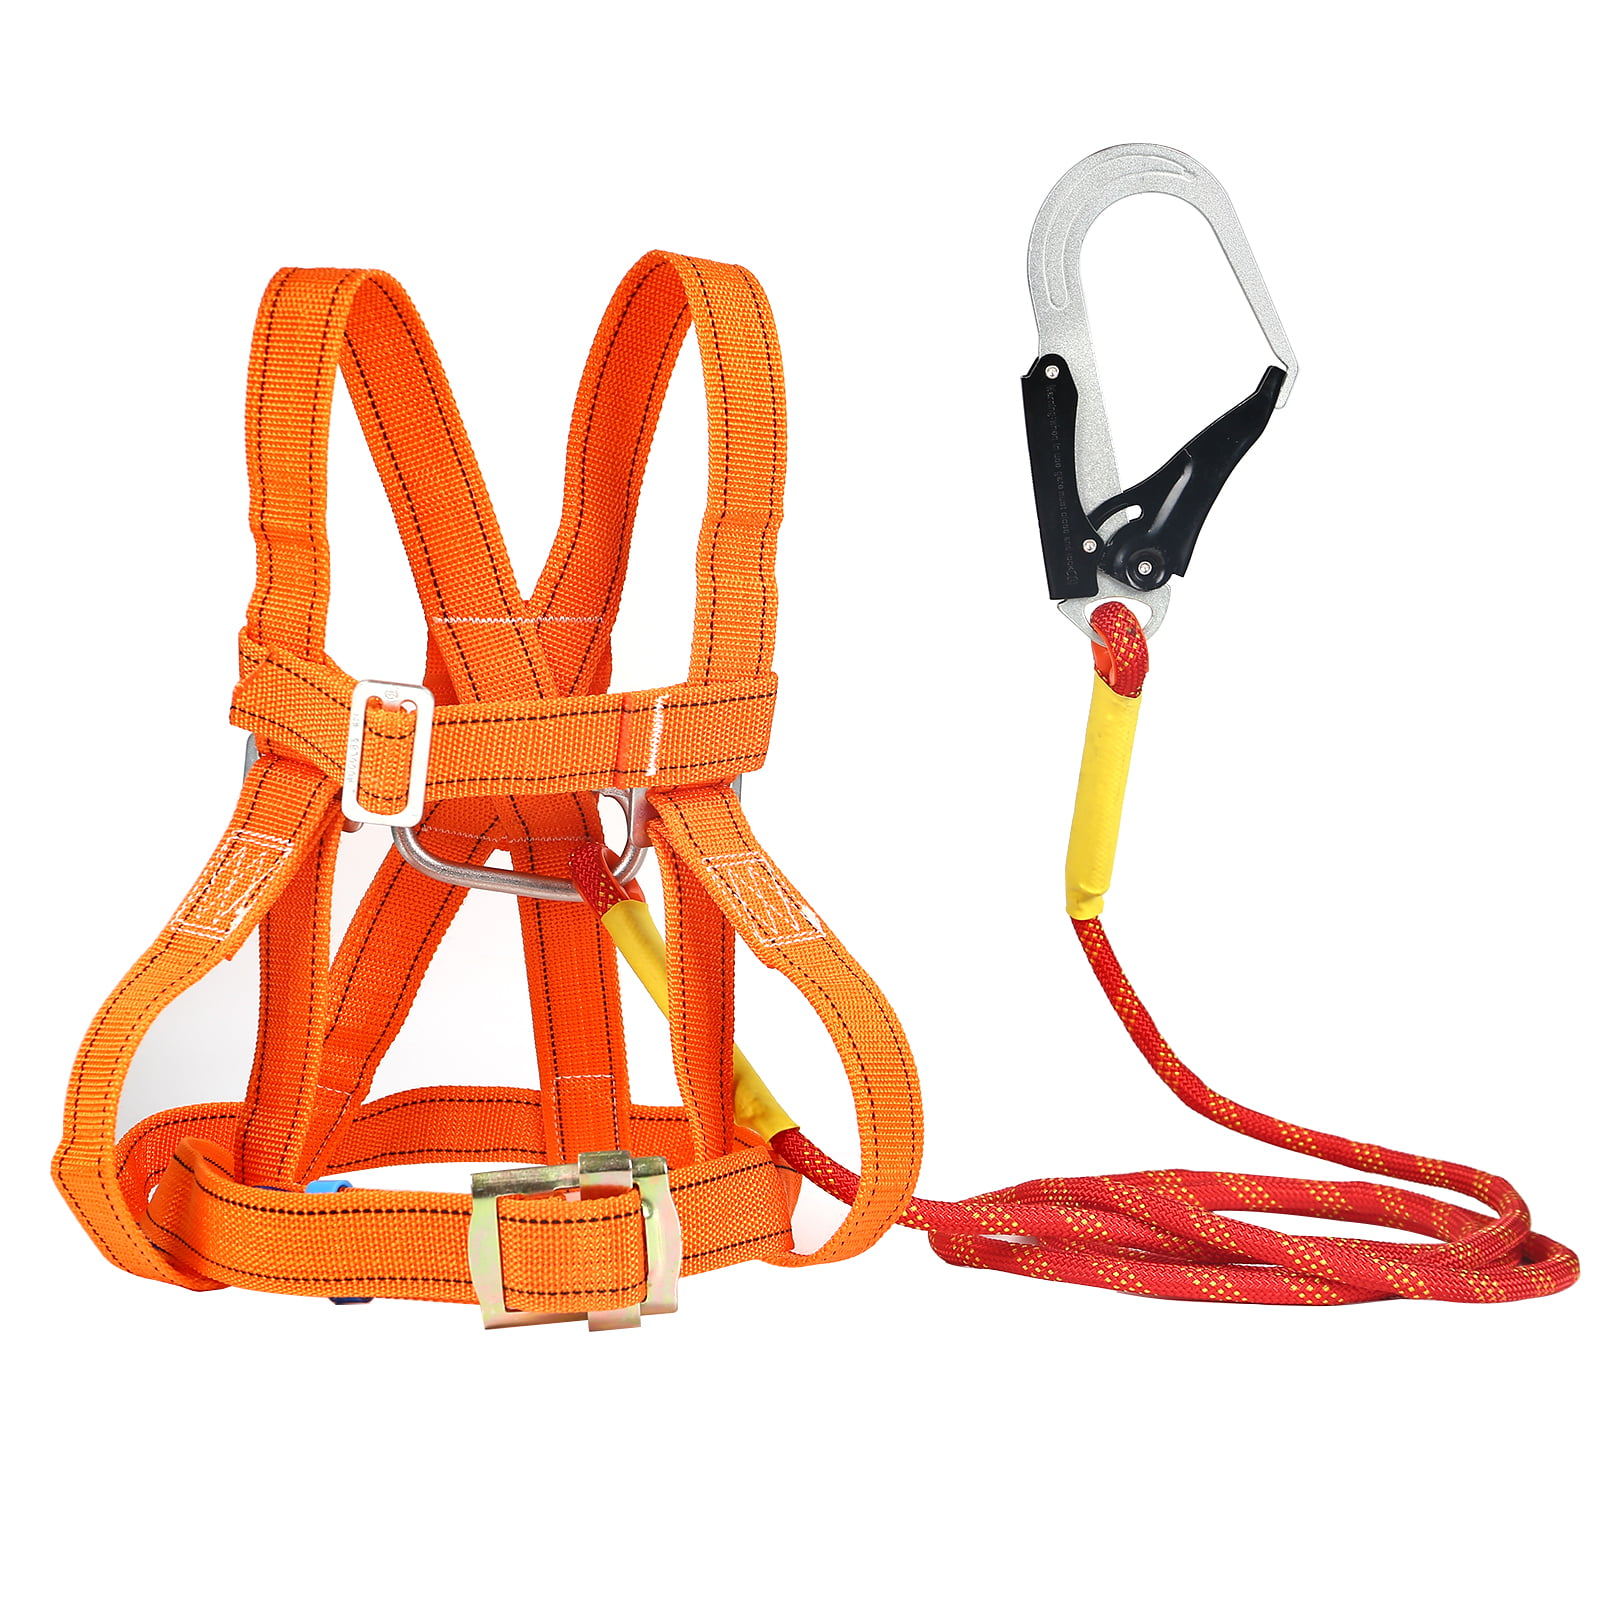 SAFETY RATED KARABINER FOR SAFETY HARNESSES TREE SURGEONS SCAFFOLDING CLIMBING 